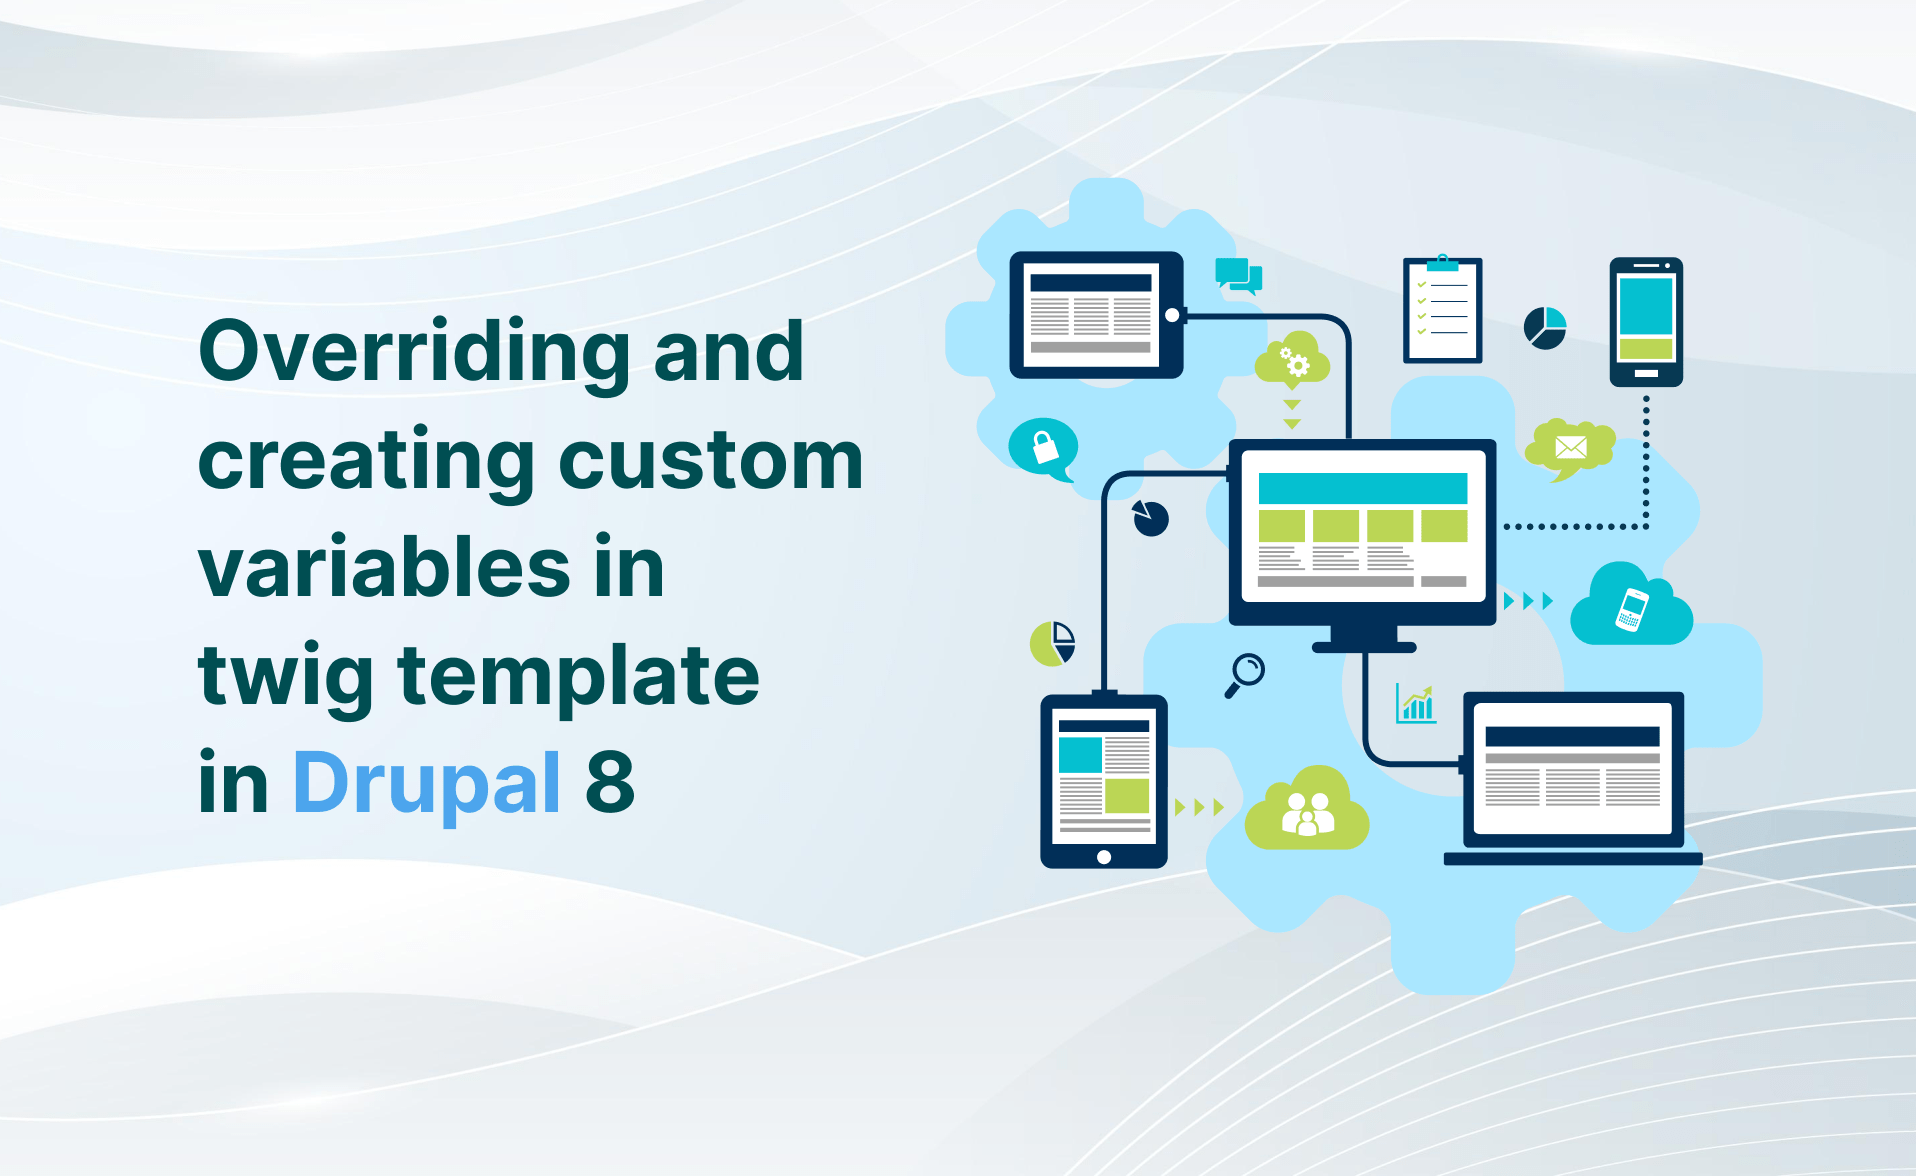 Overriding and creating custom variables in twig template in Drupal 8 image